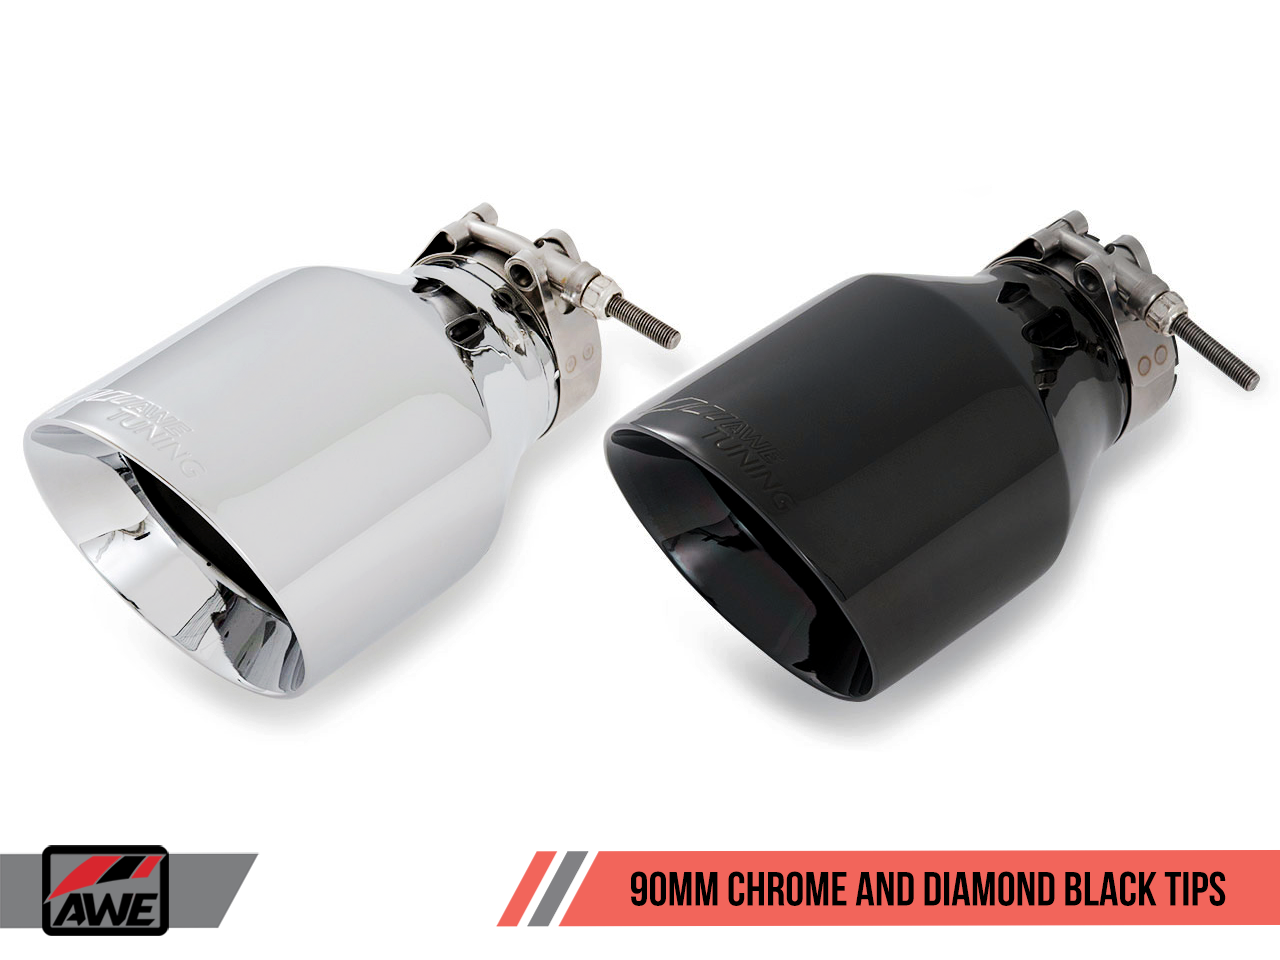 AWE SwitchPath™ Exhaust for B9 S4 - Resonated for Performance Catalyst - Diamond Black 90mm Tips